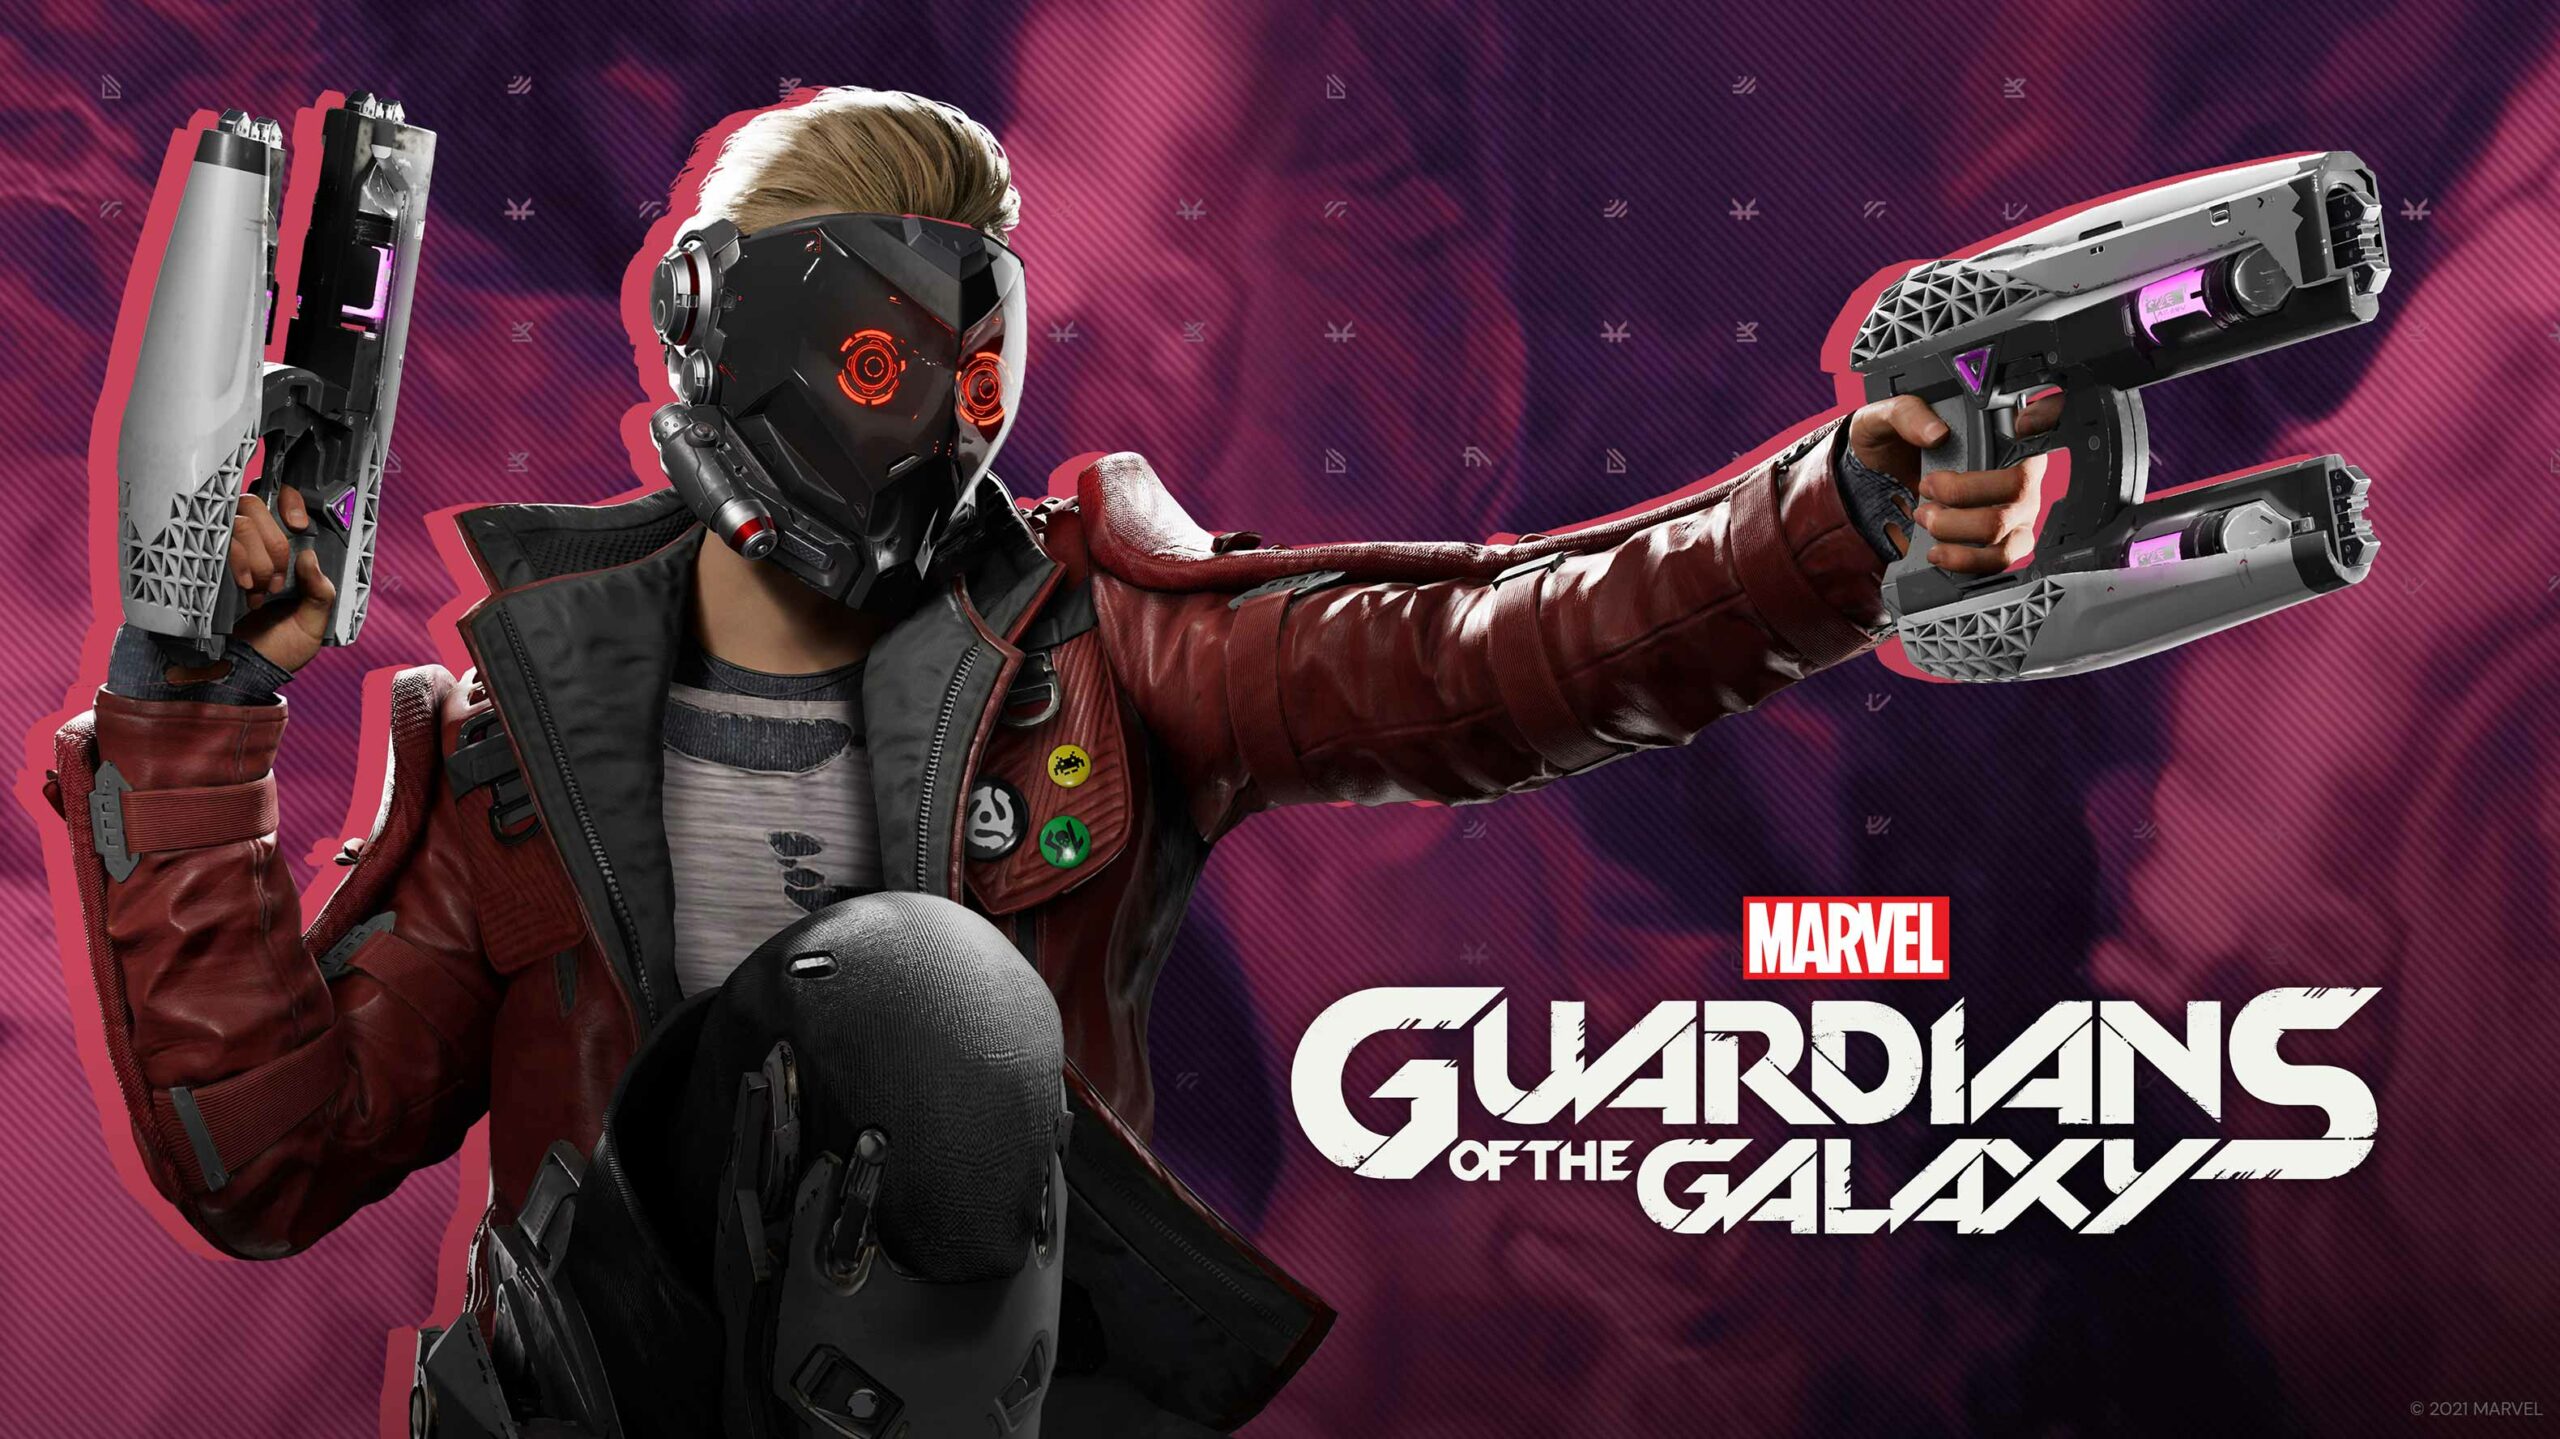 Marvel's Guardians of the Galaxy poster with Star-Lord pointing his blasters